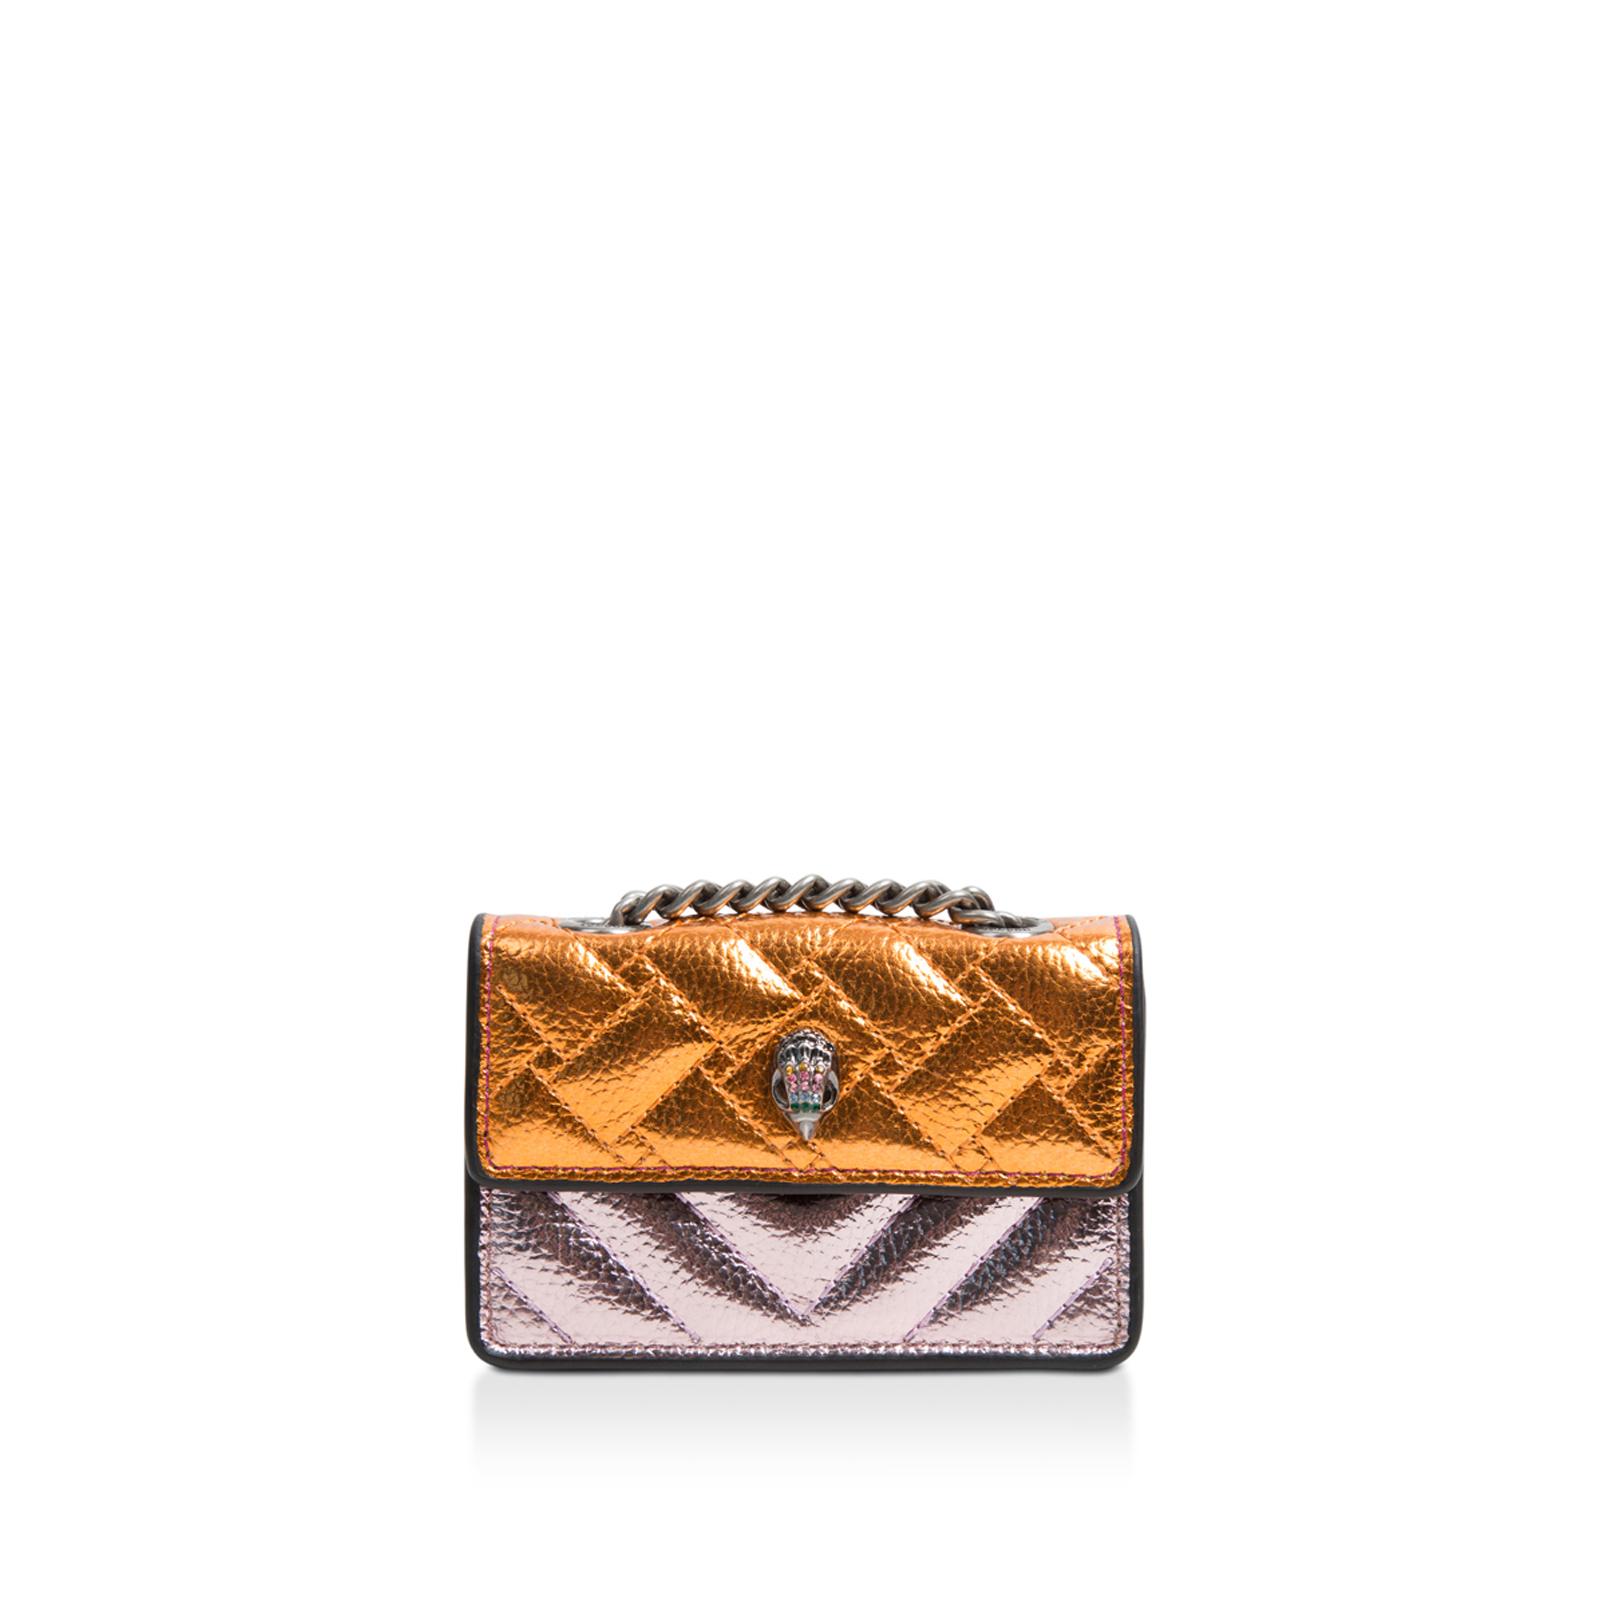 MICRO KENSINGTON Multi-Coloured Micro Quilted Cross Body Bag by KURT GEIGER LONDON